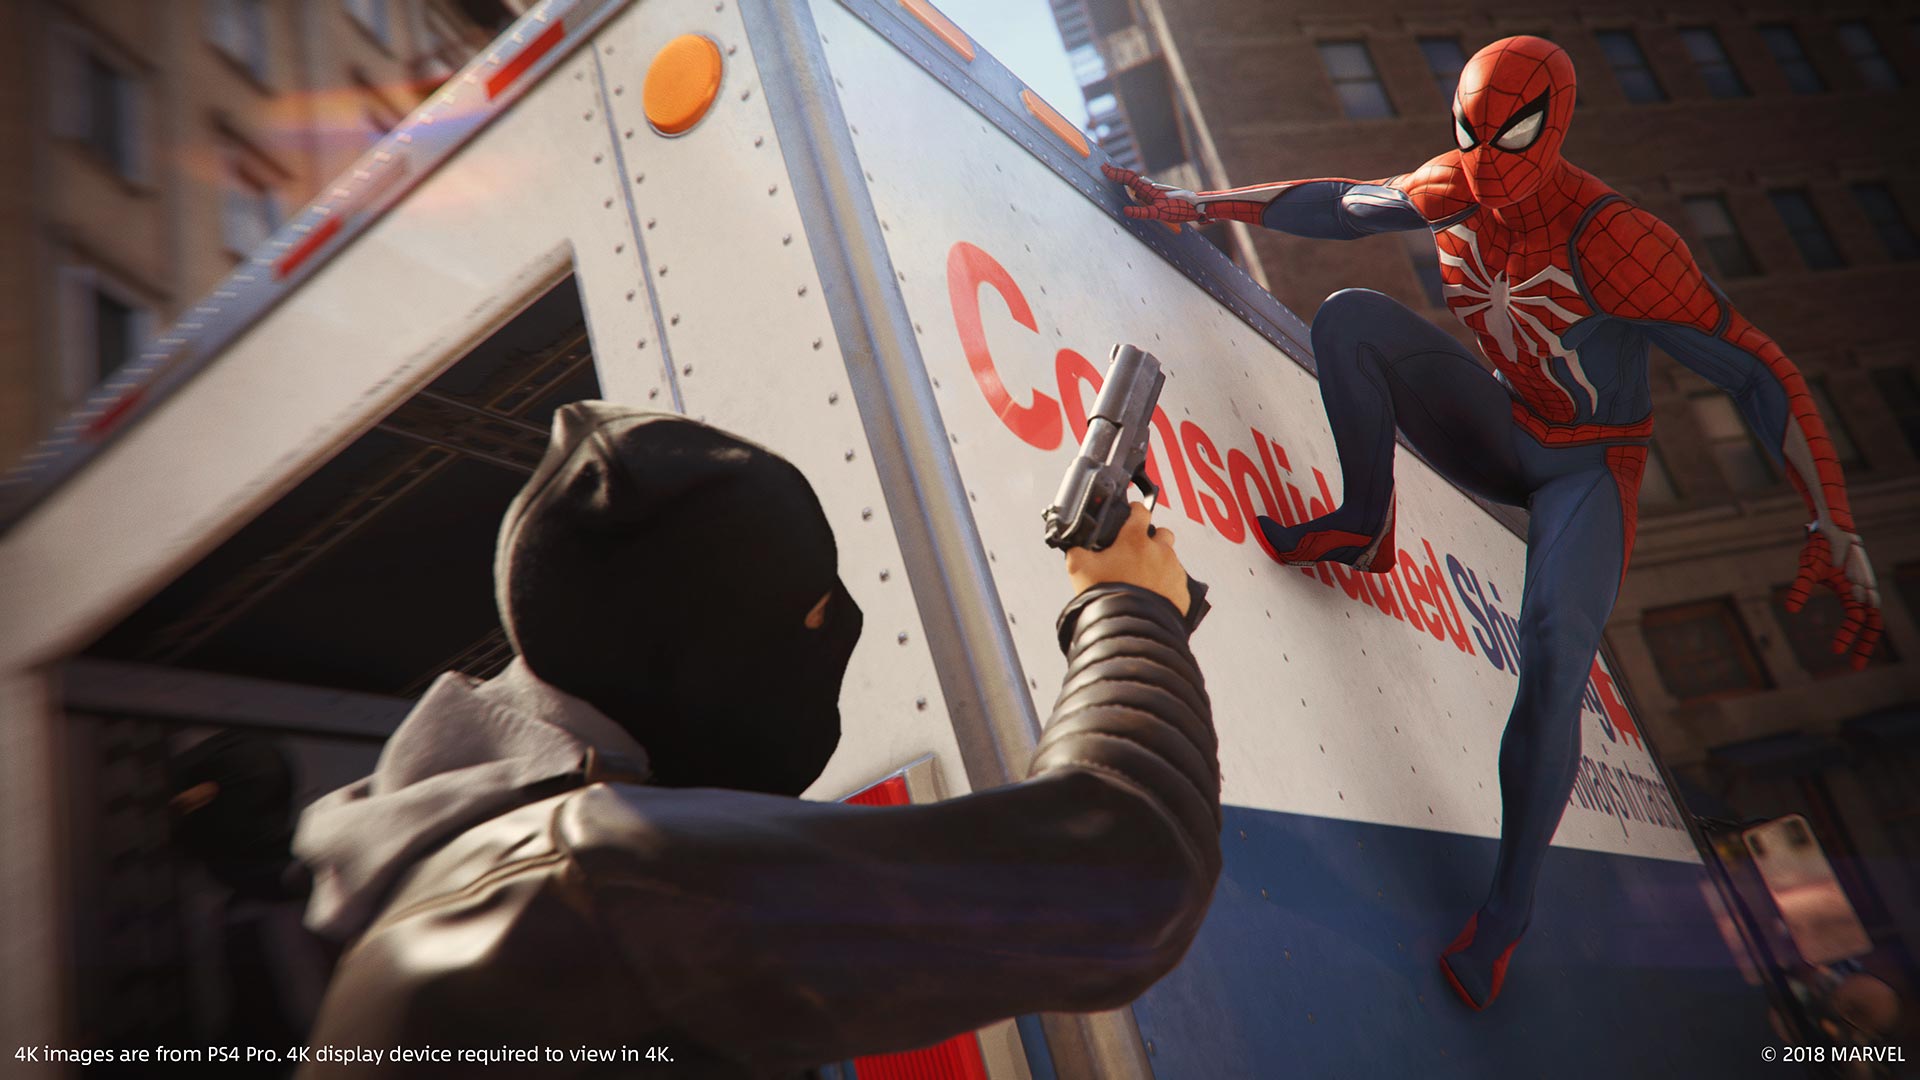 spider man ps4 price on playstation store